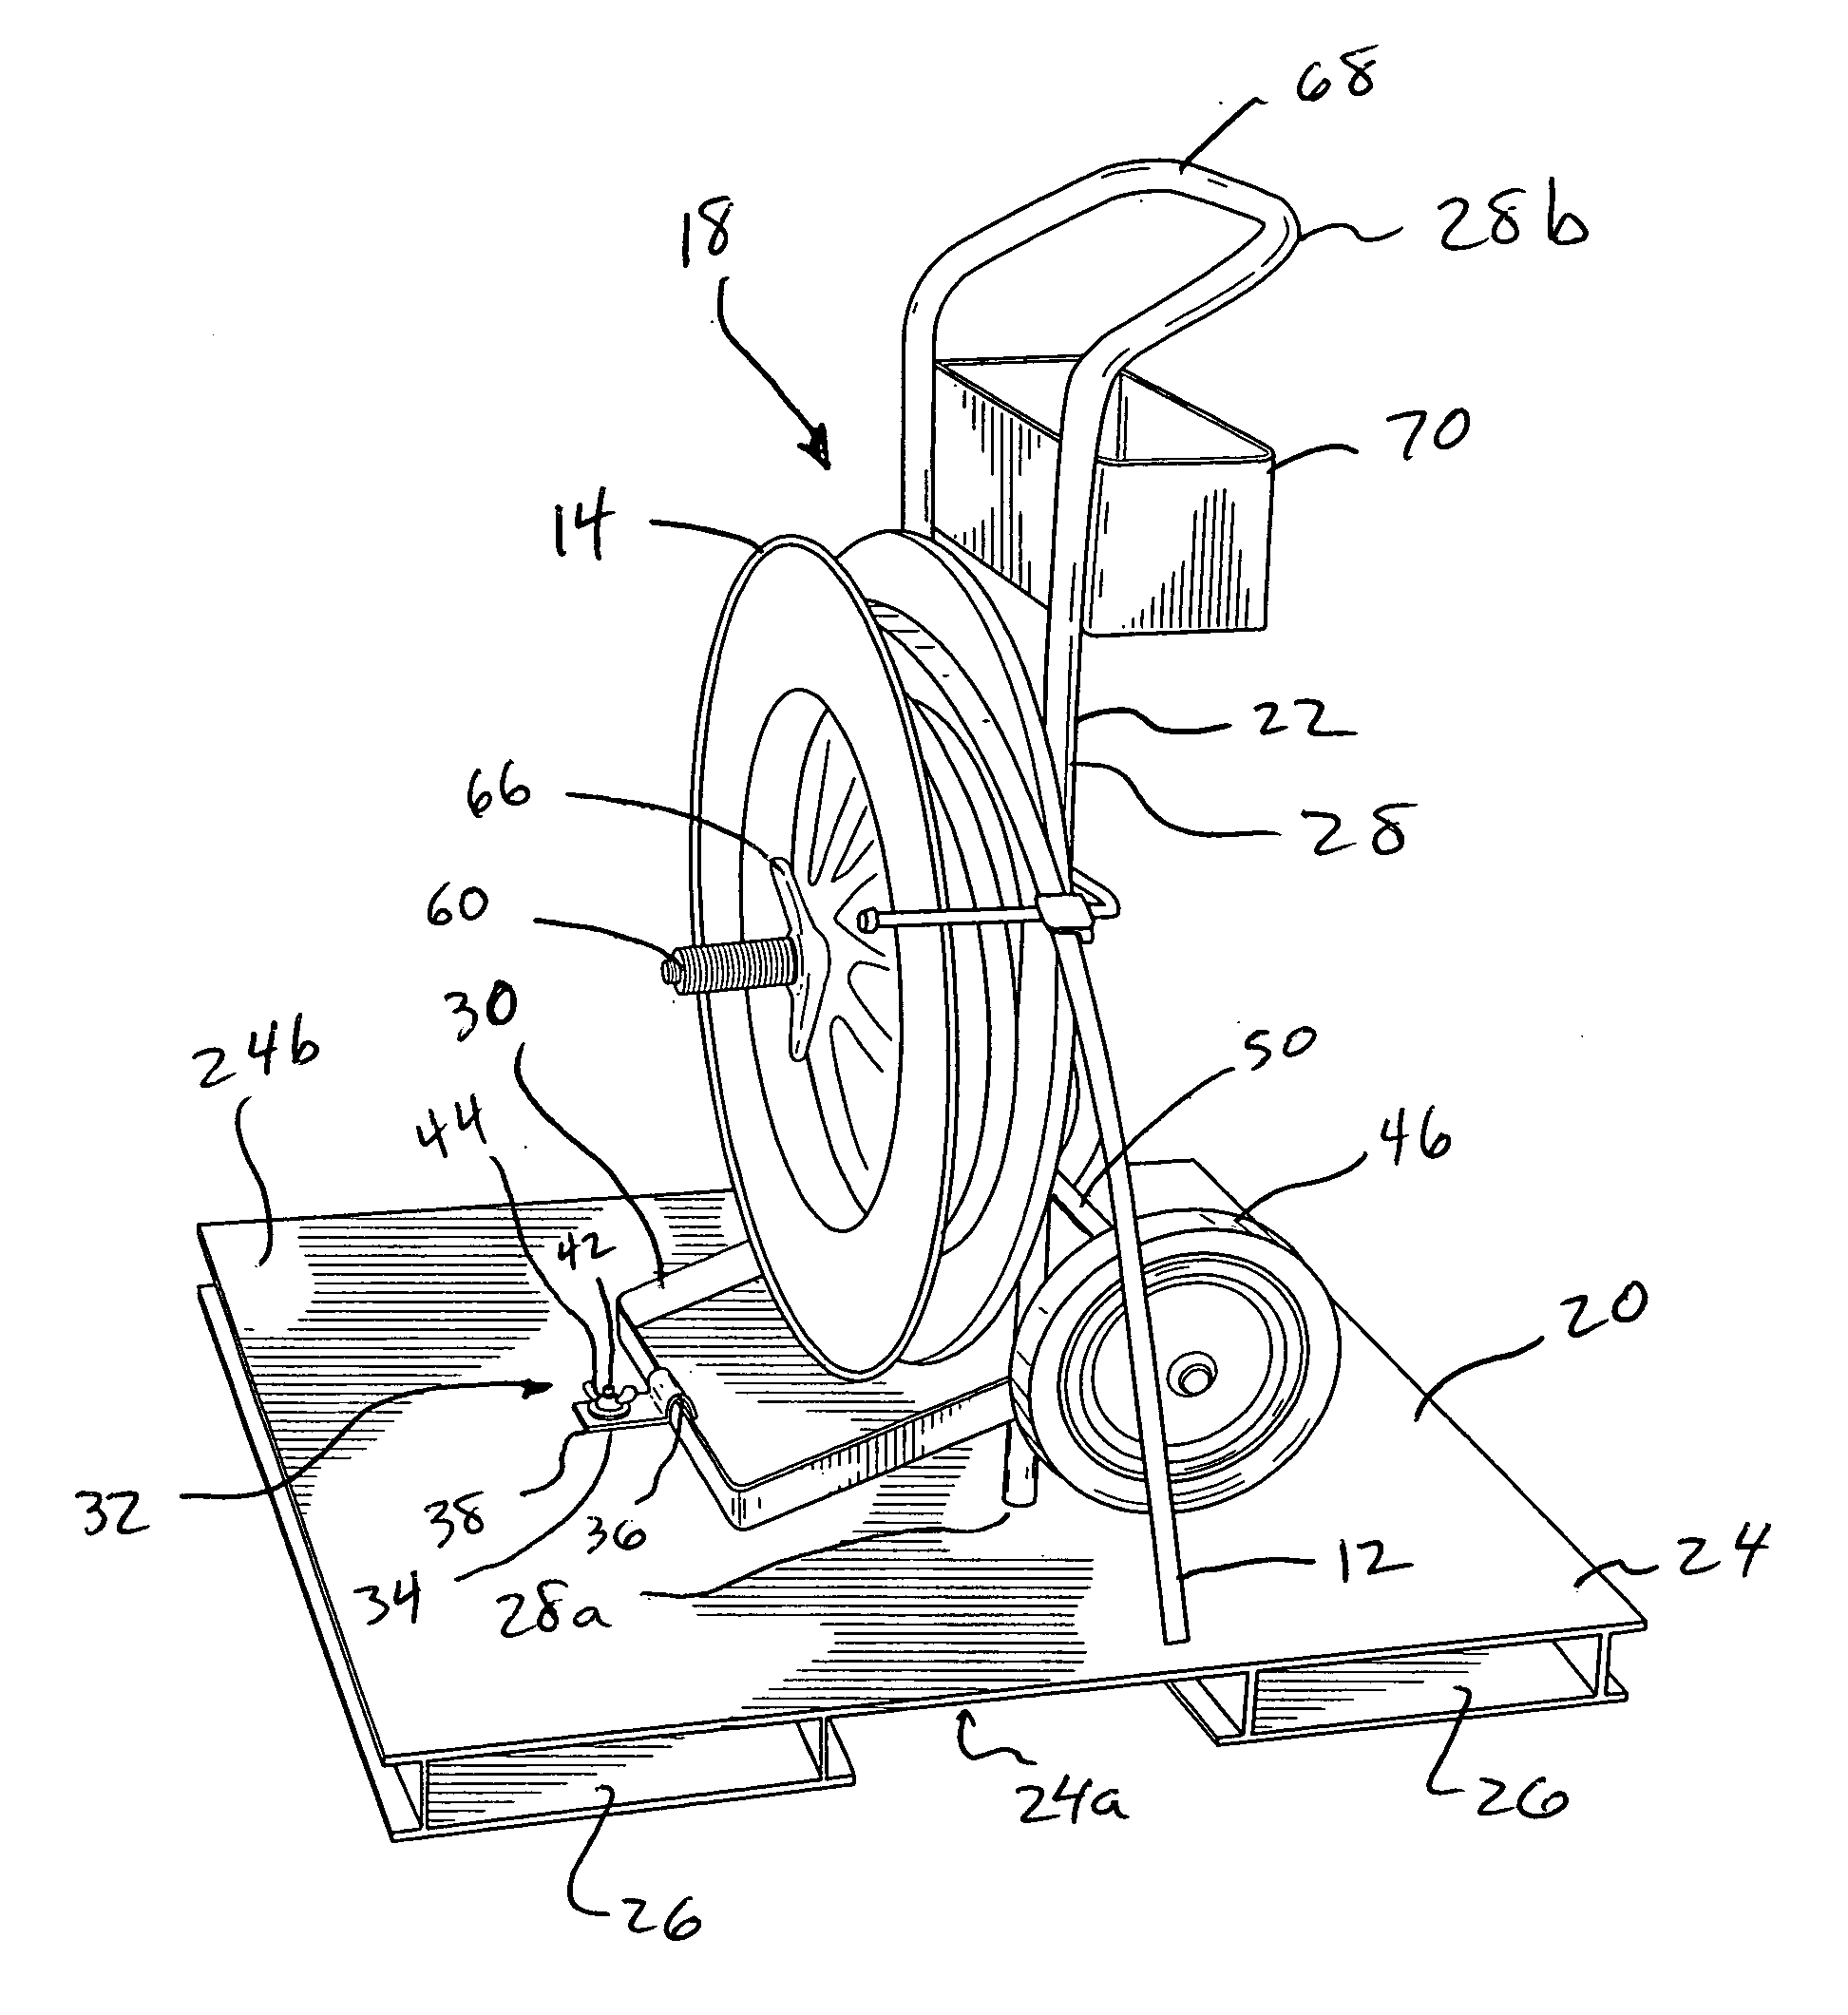 Apparatus and method for transporting and dispensing a strap